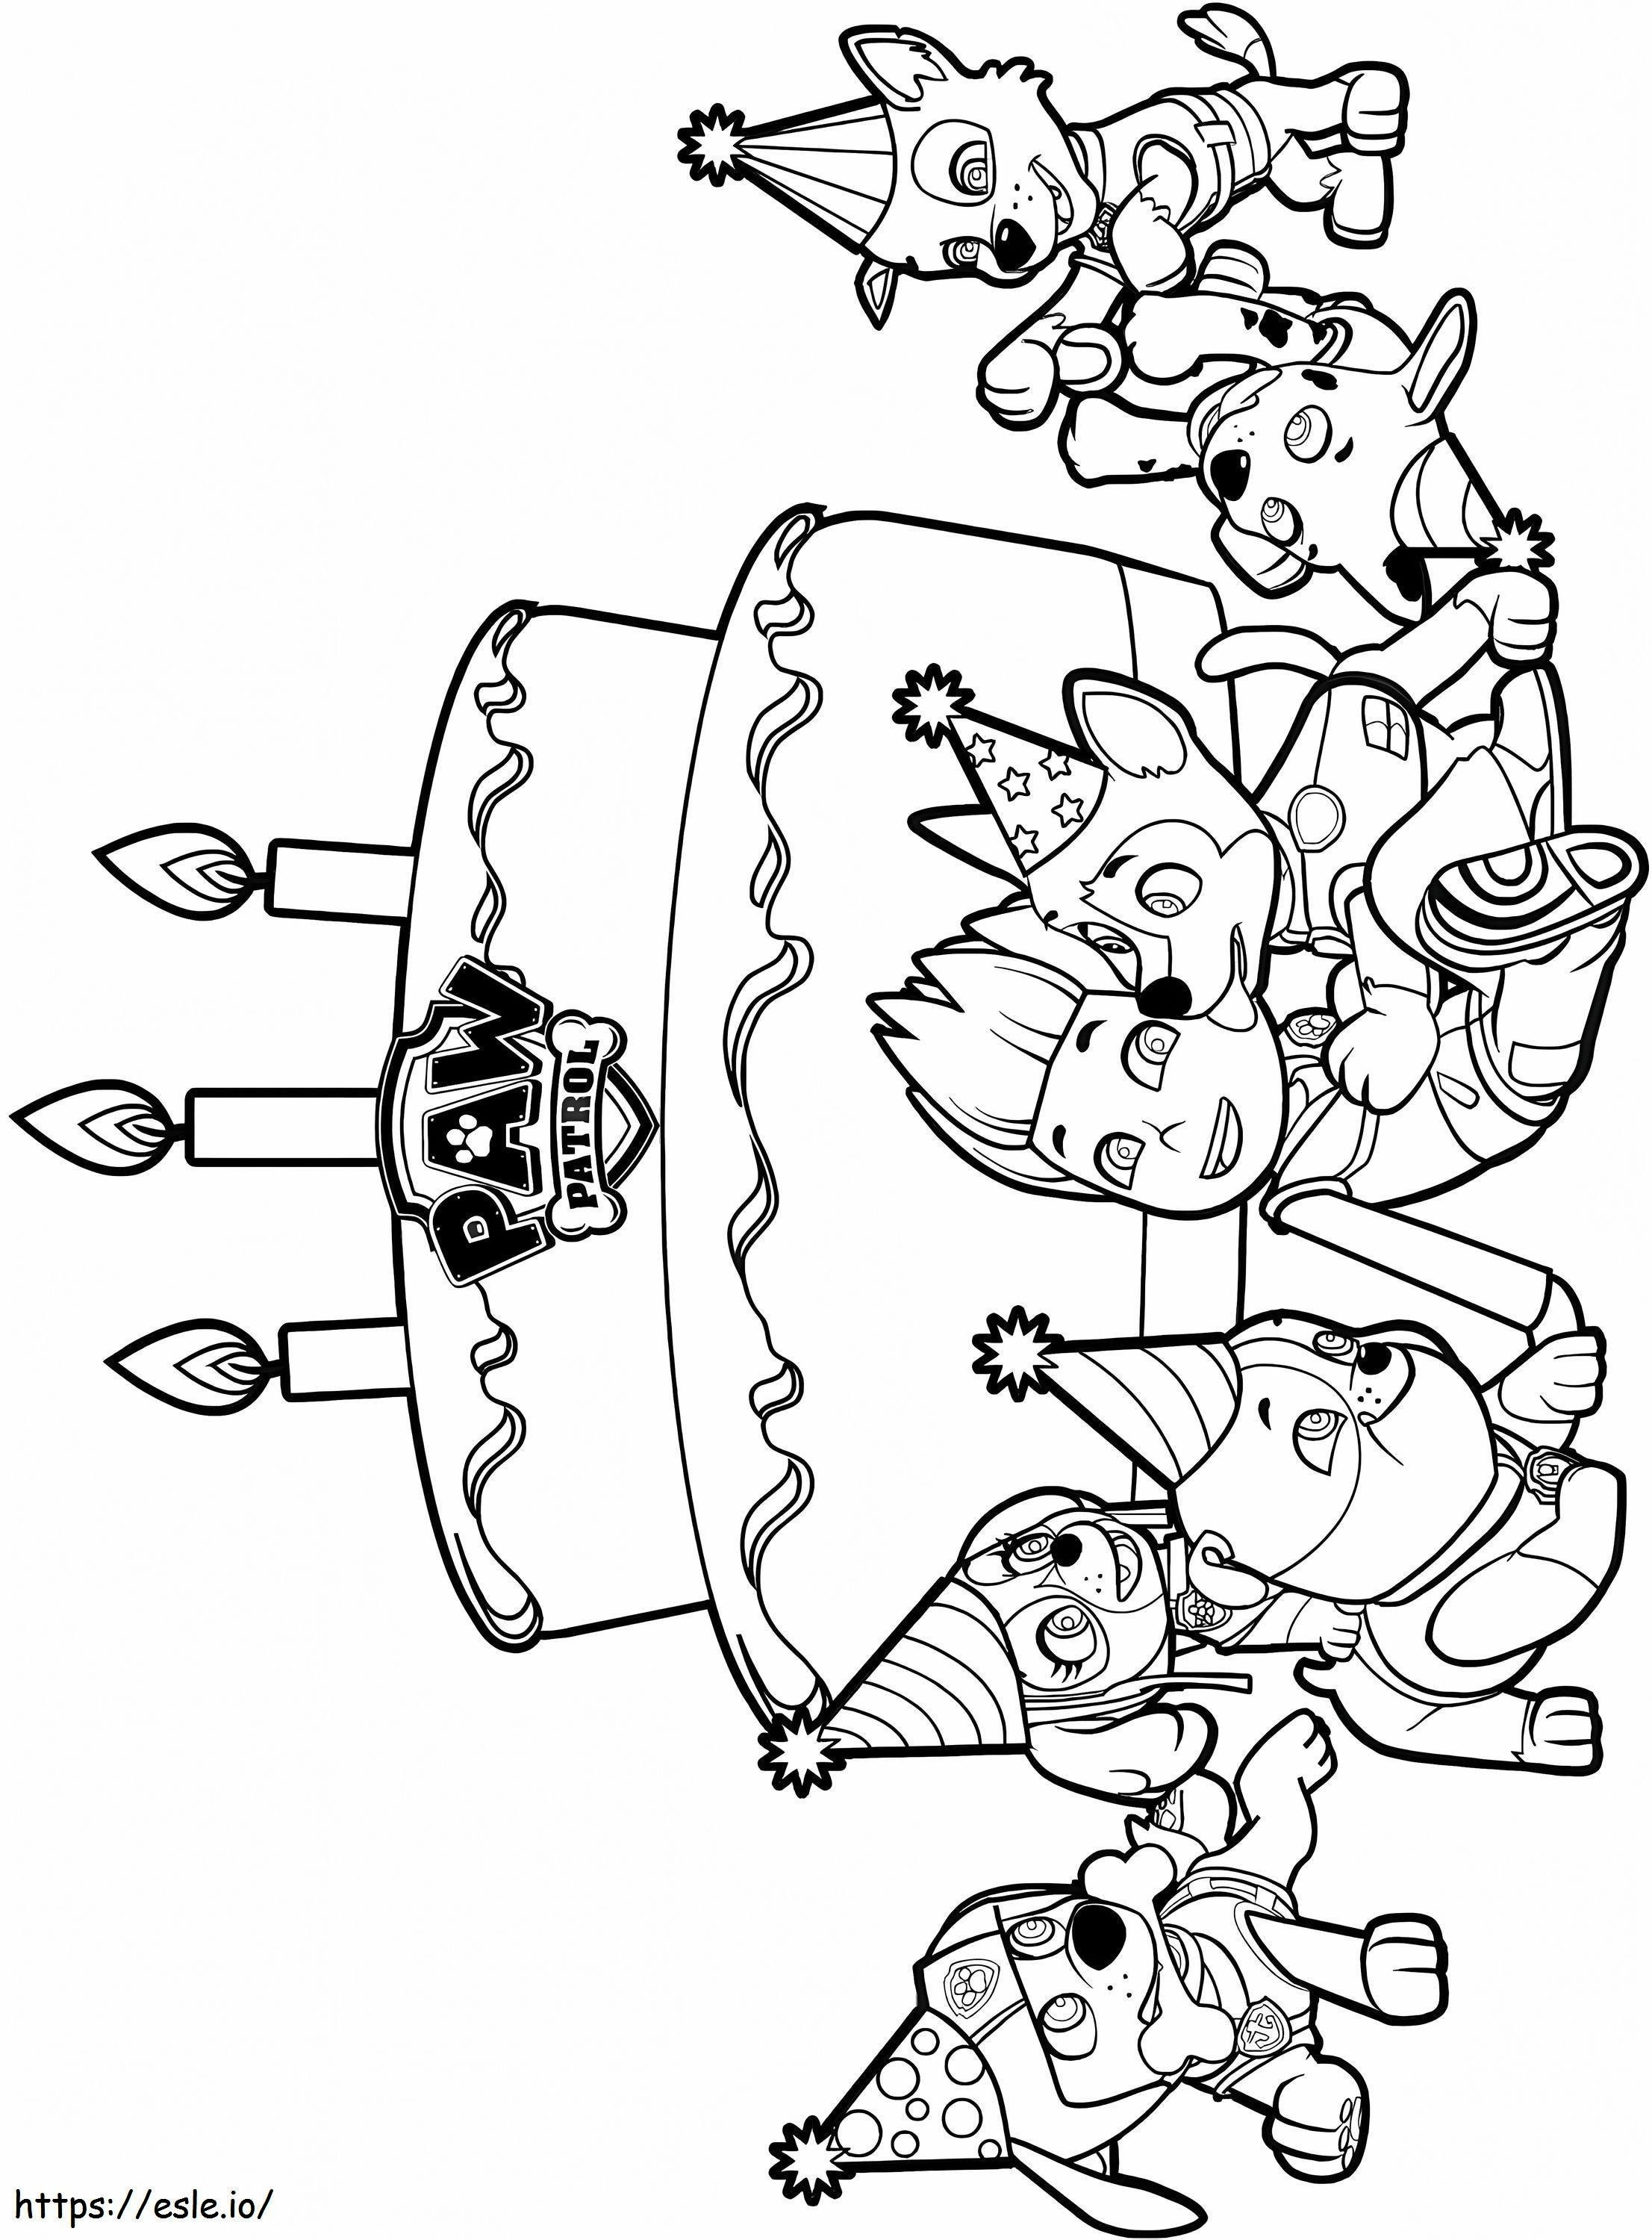 Happy Birthday To You Ryder coloring page